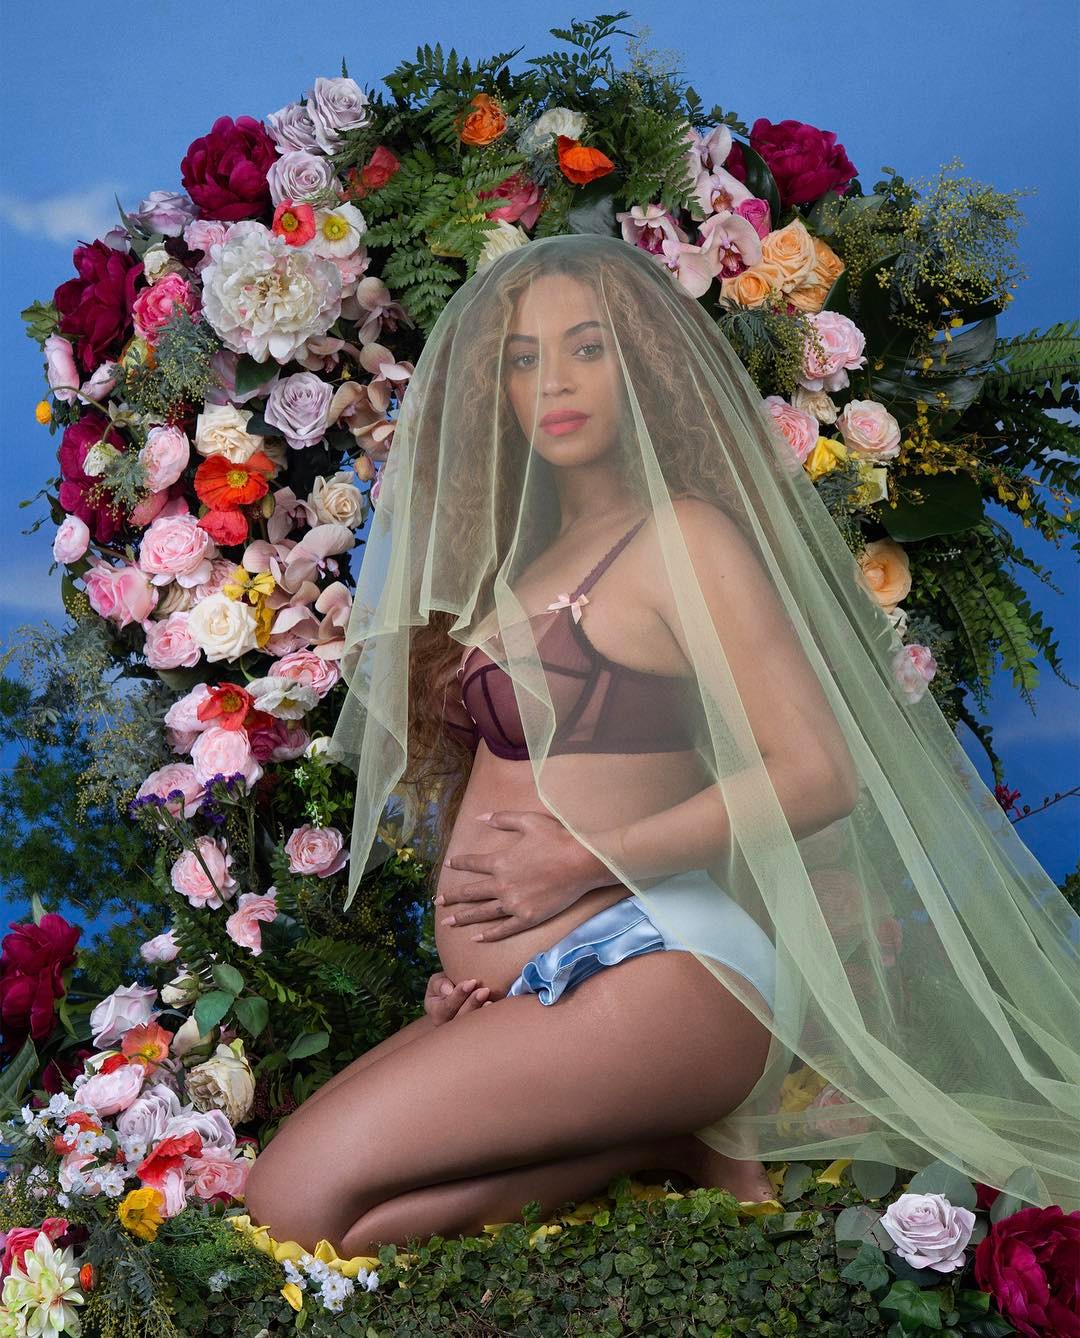 Beyonce's Instagram post announcing her pregnancy.